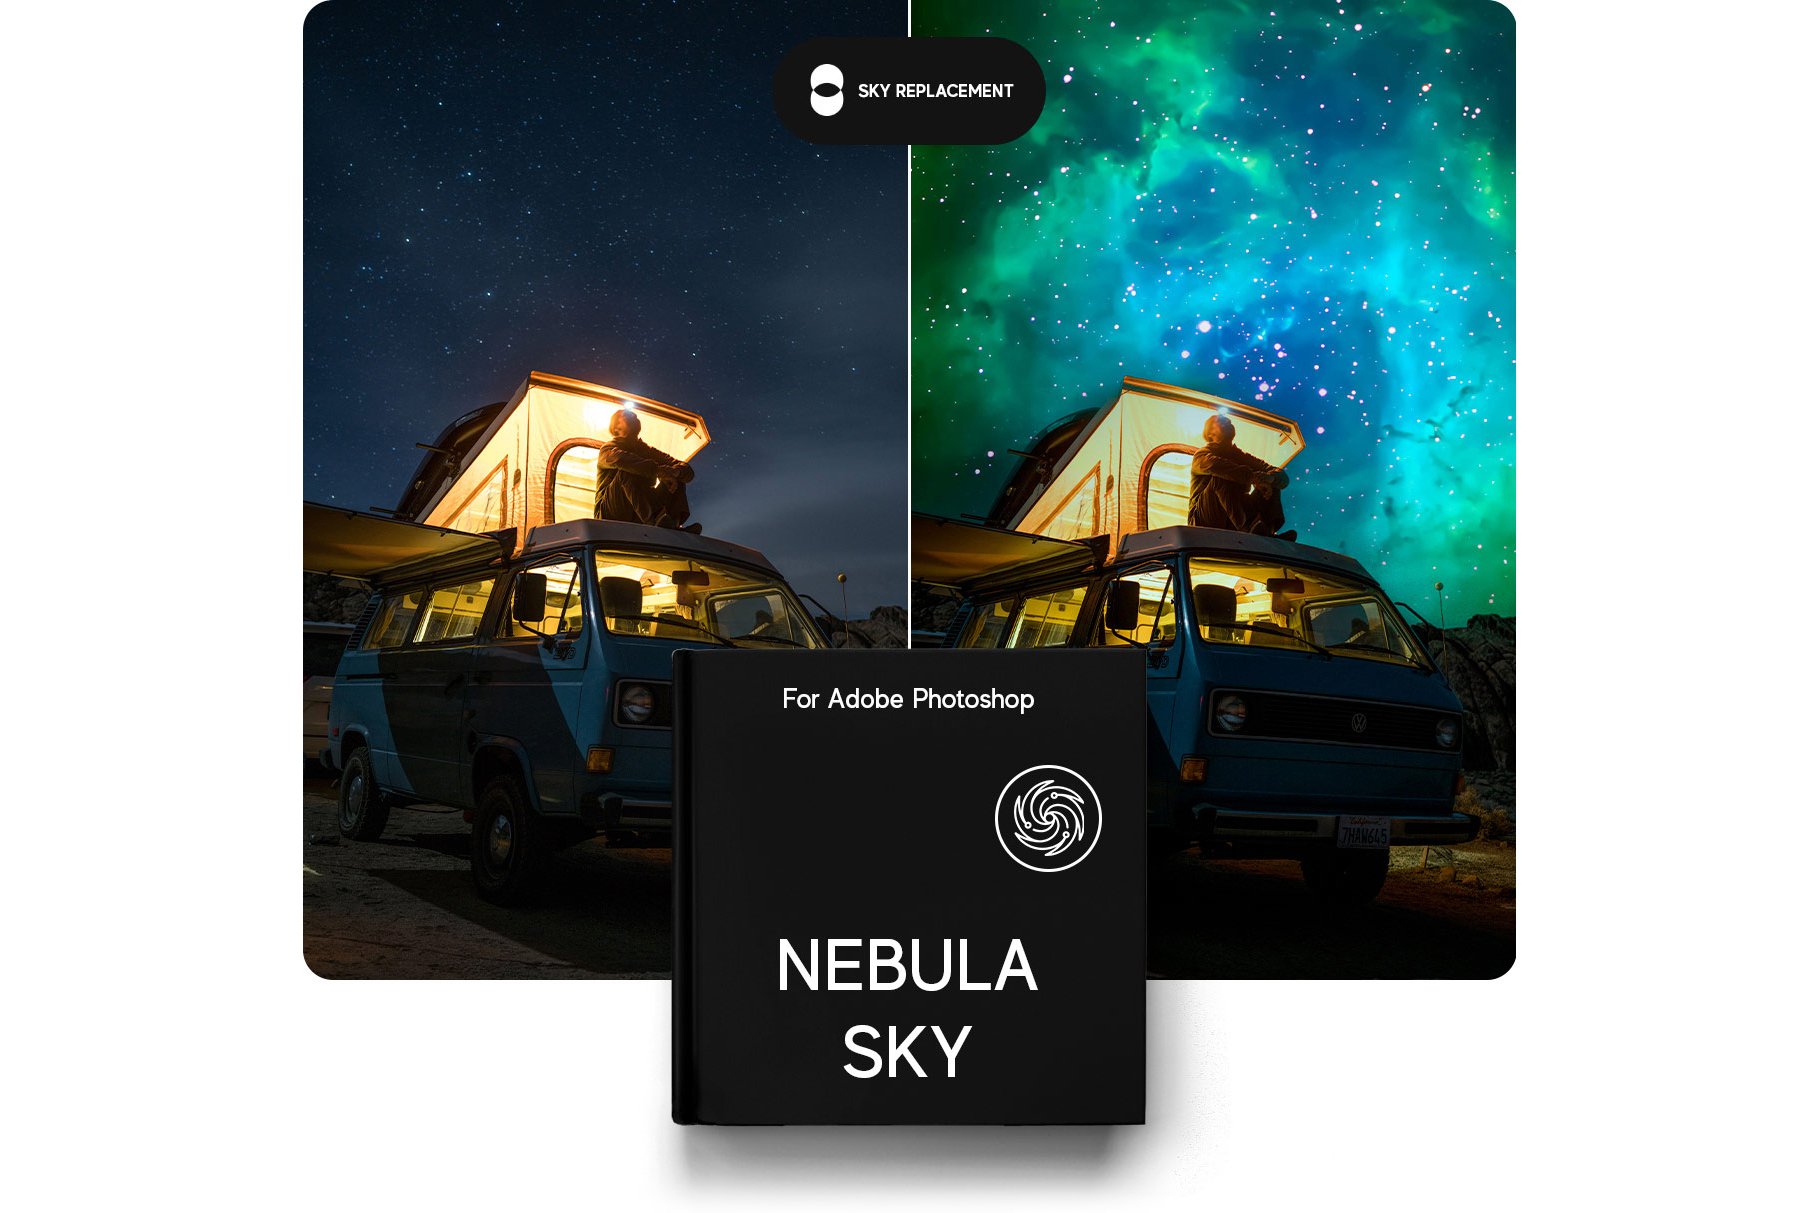 nebula sky replacement pack for adobe photoshop 1 90